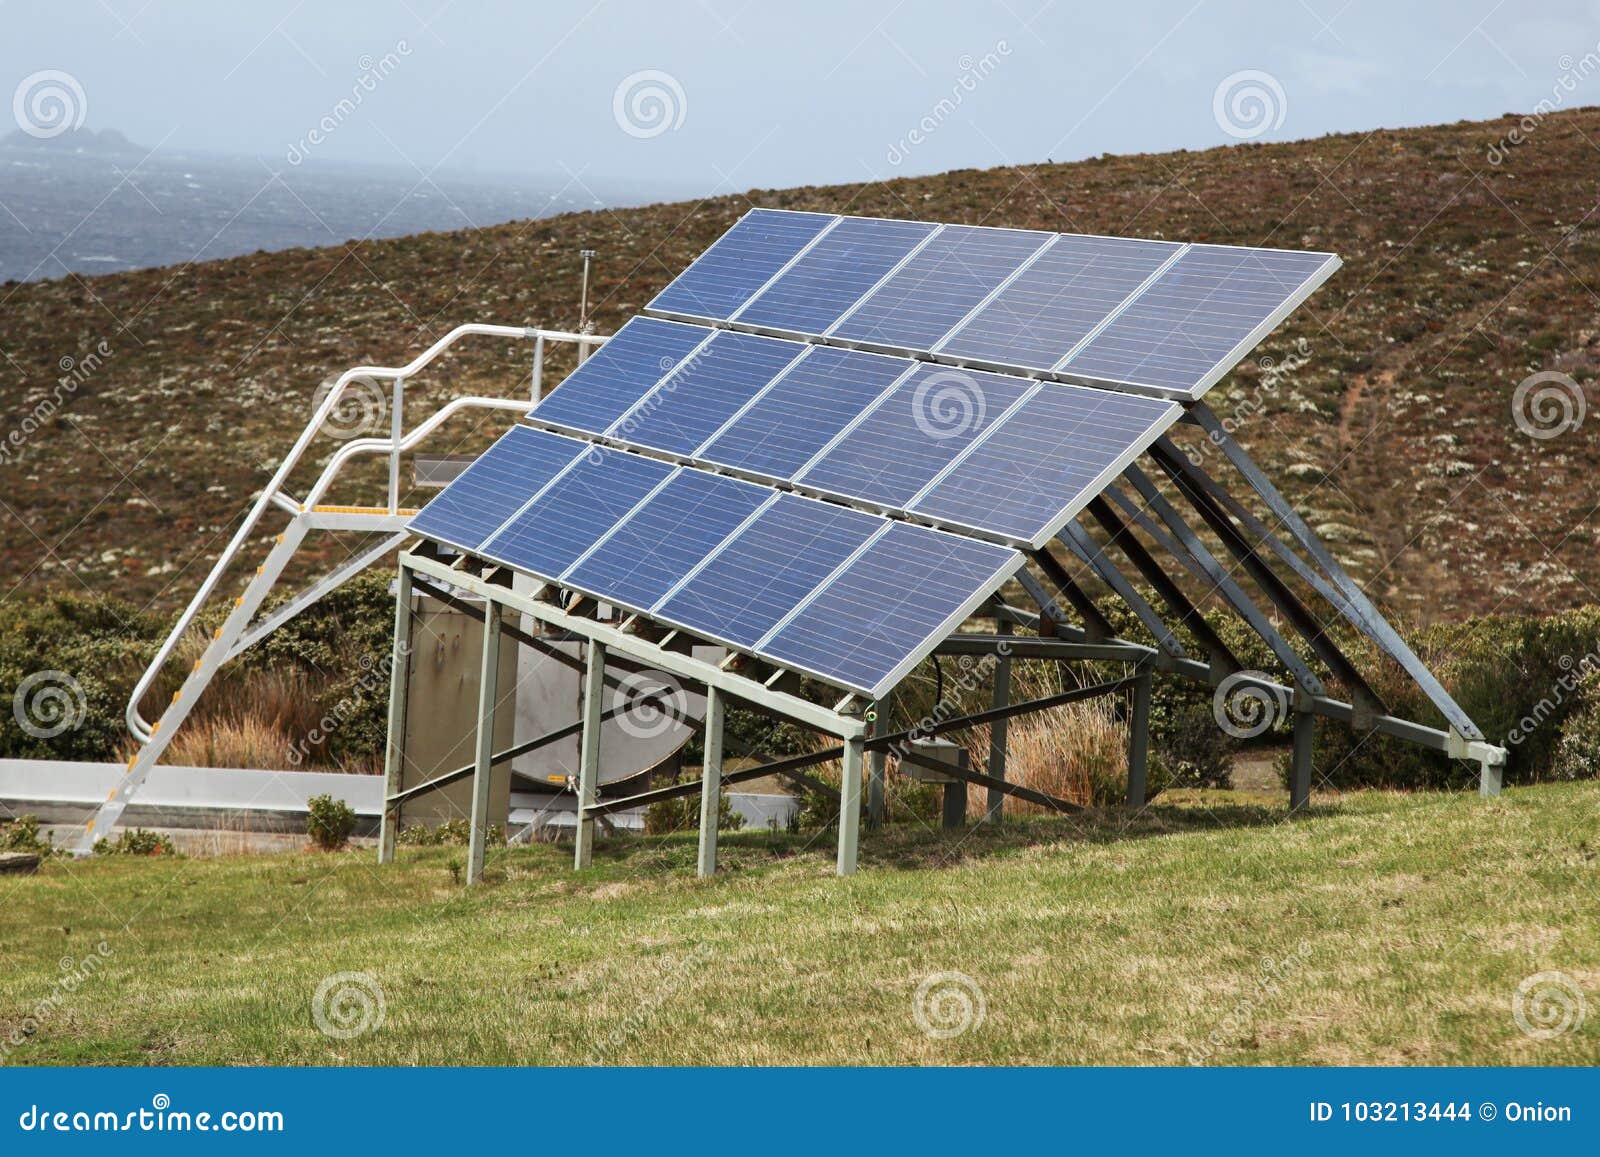 solar panels situated on a hill